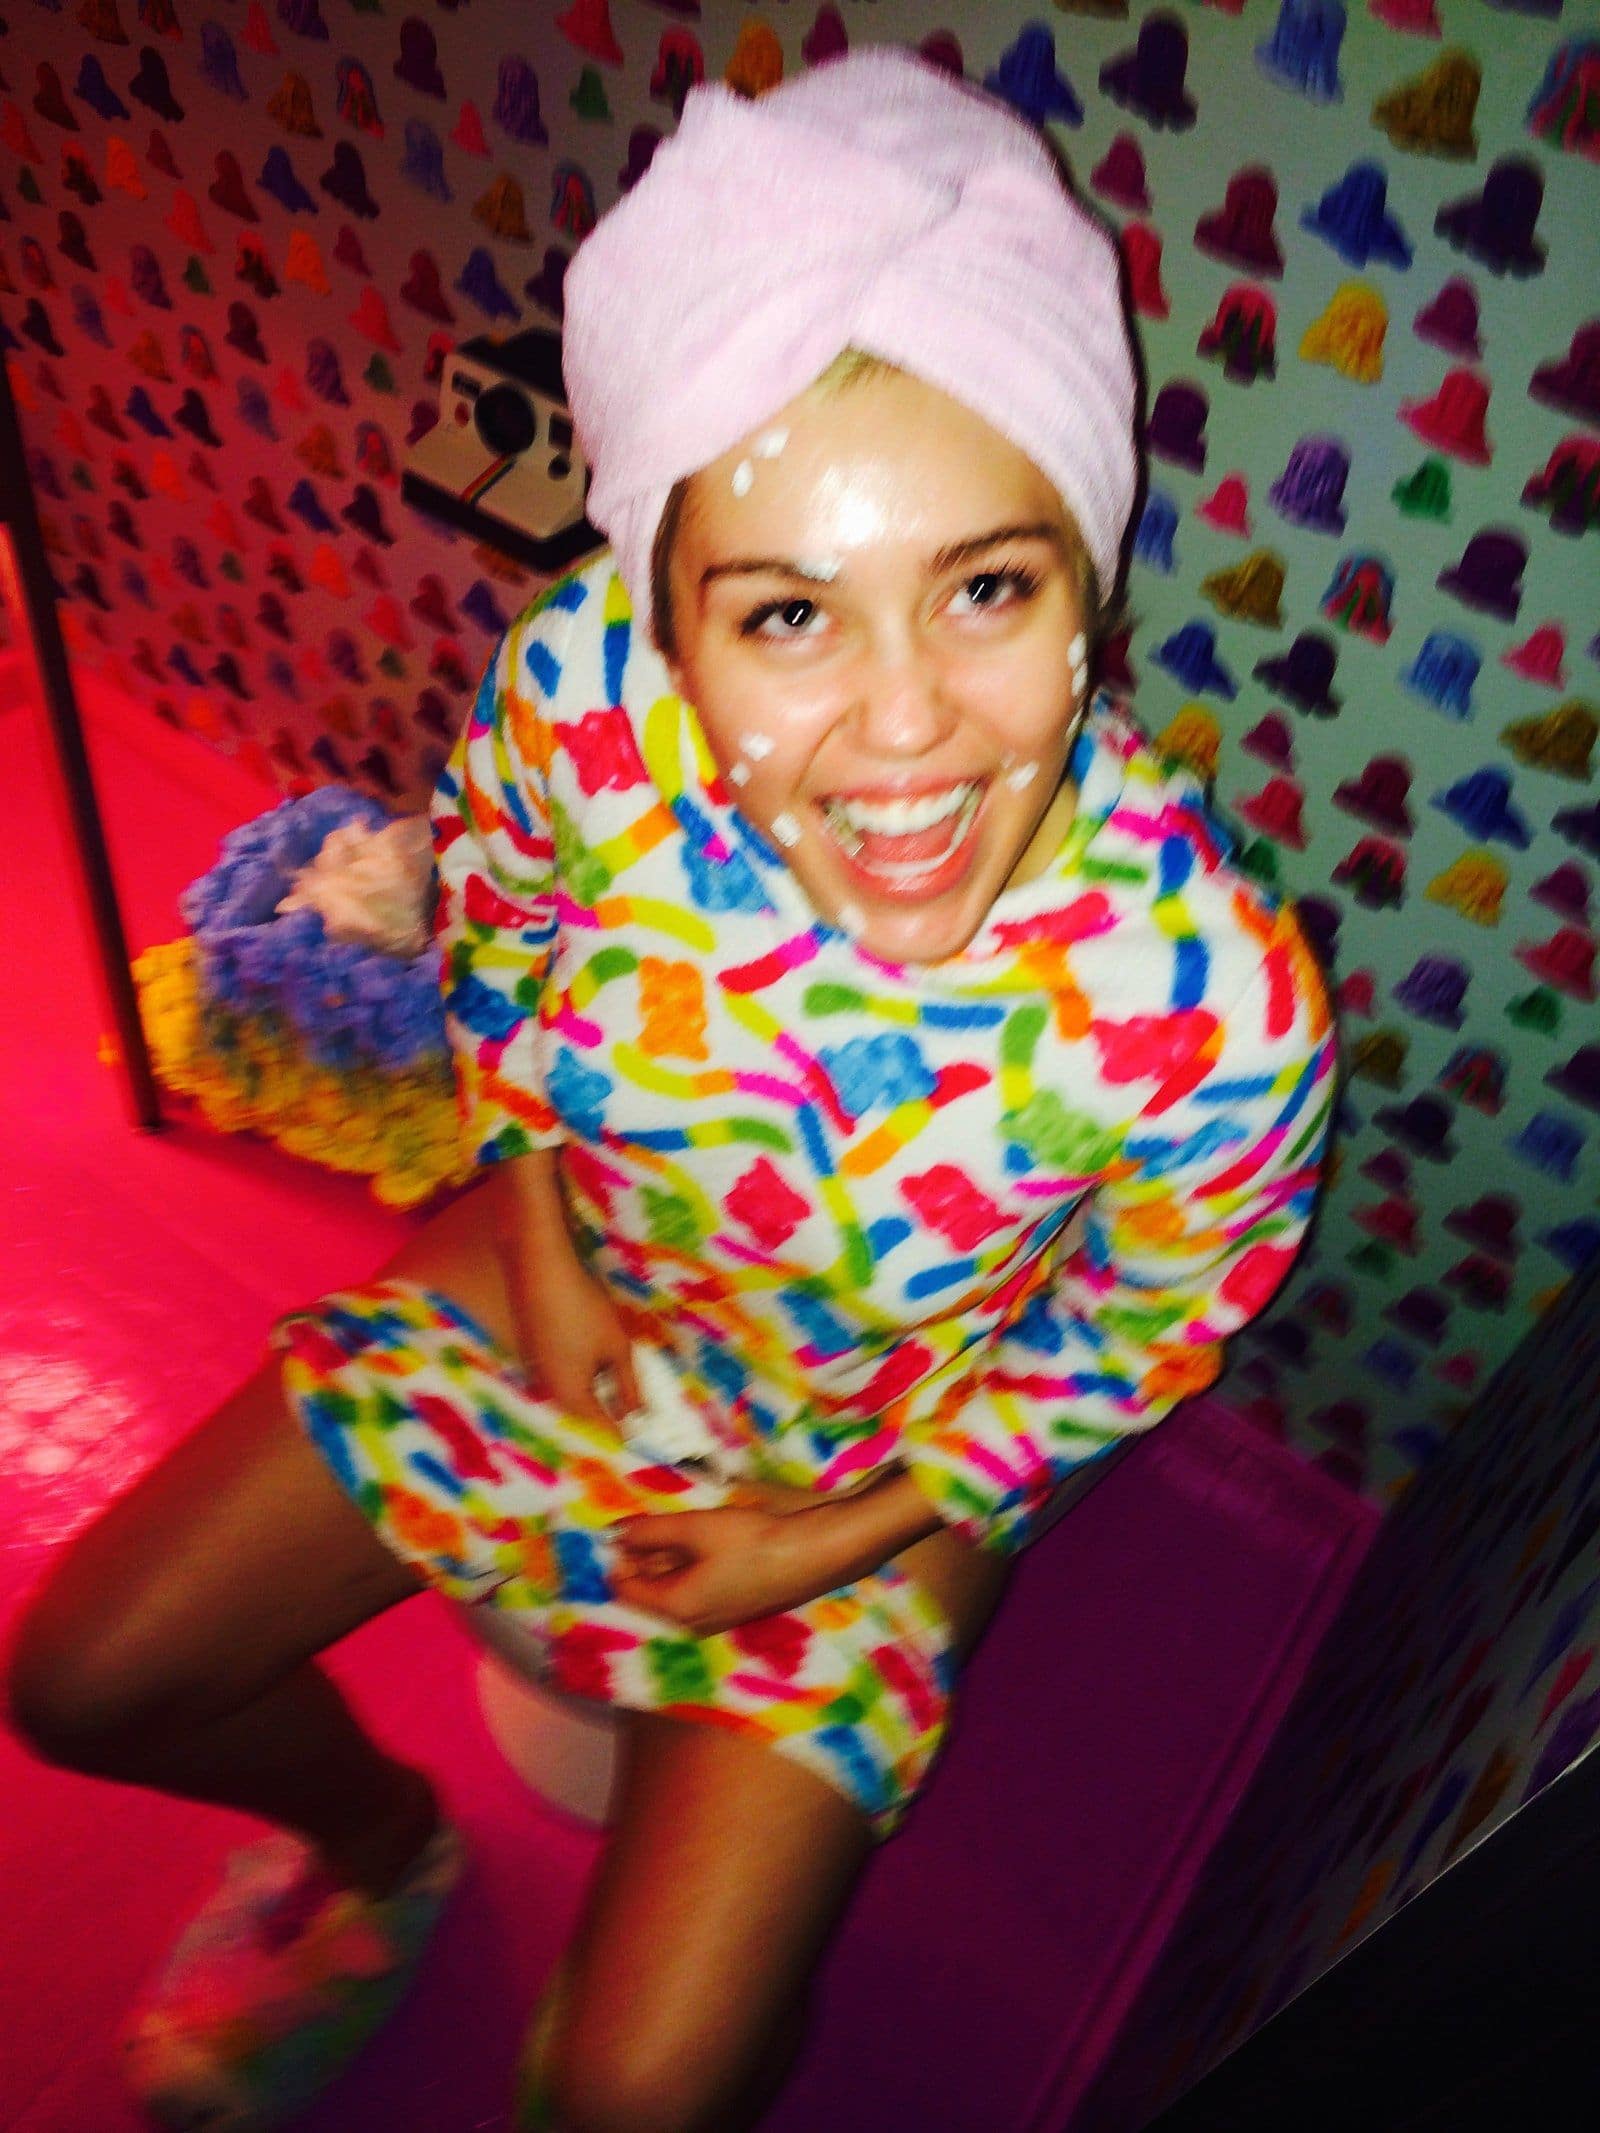 Miley Cyrus peeing wearing a head wrap